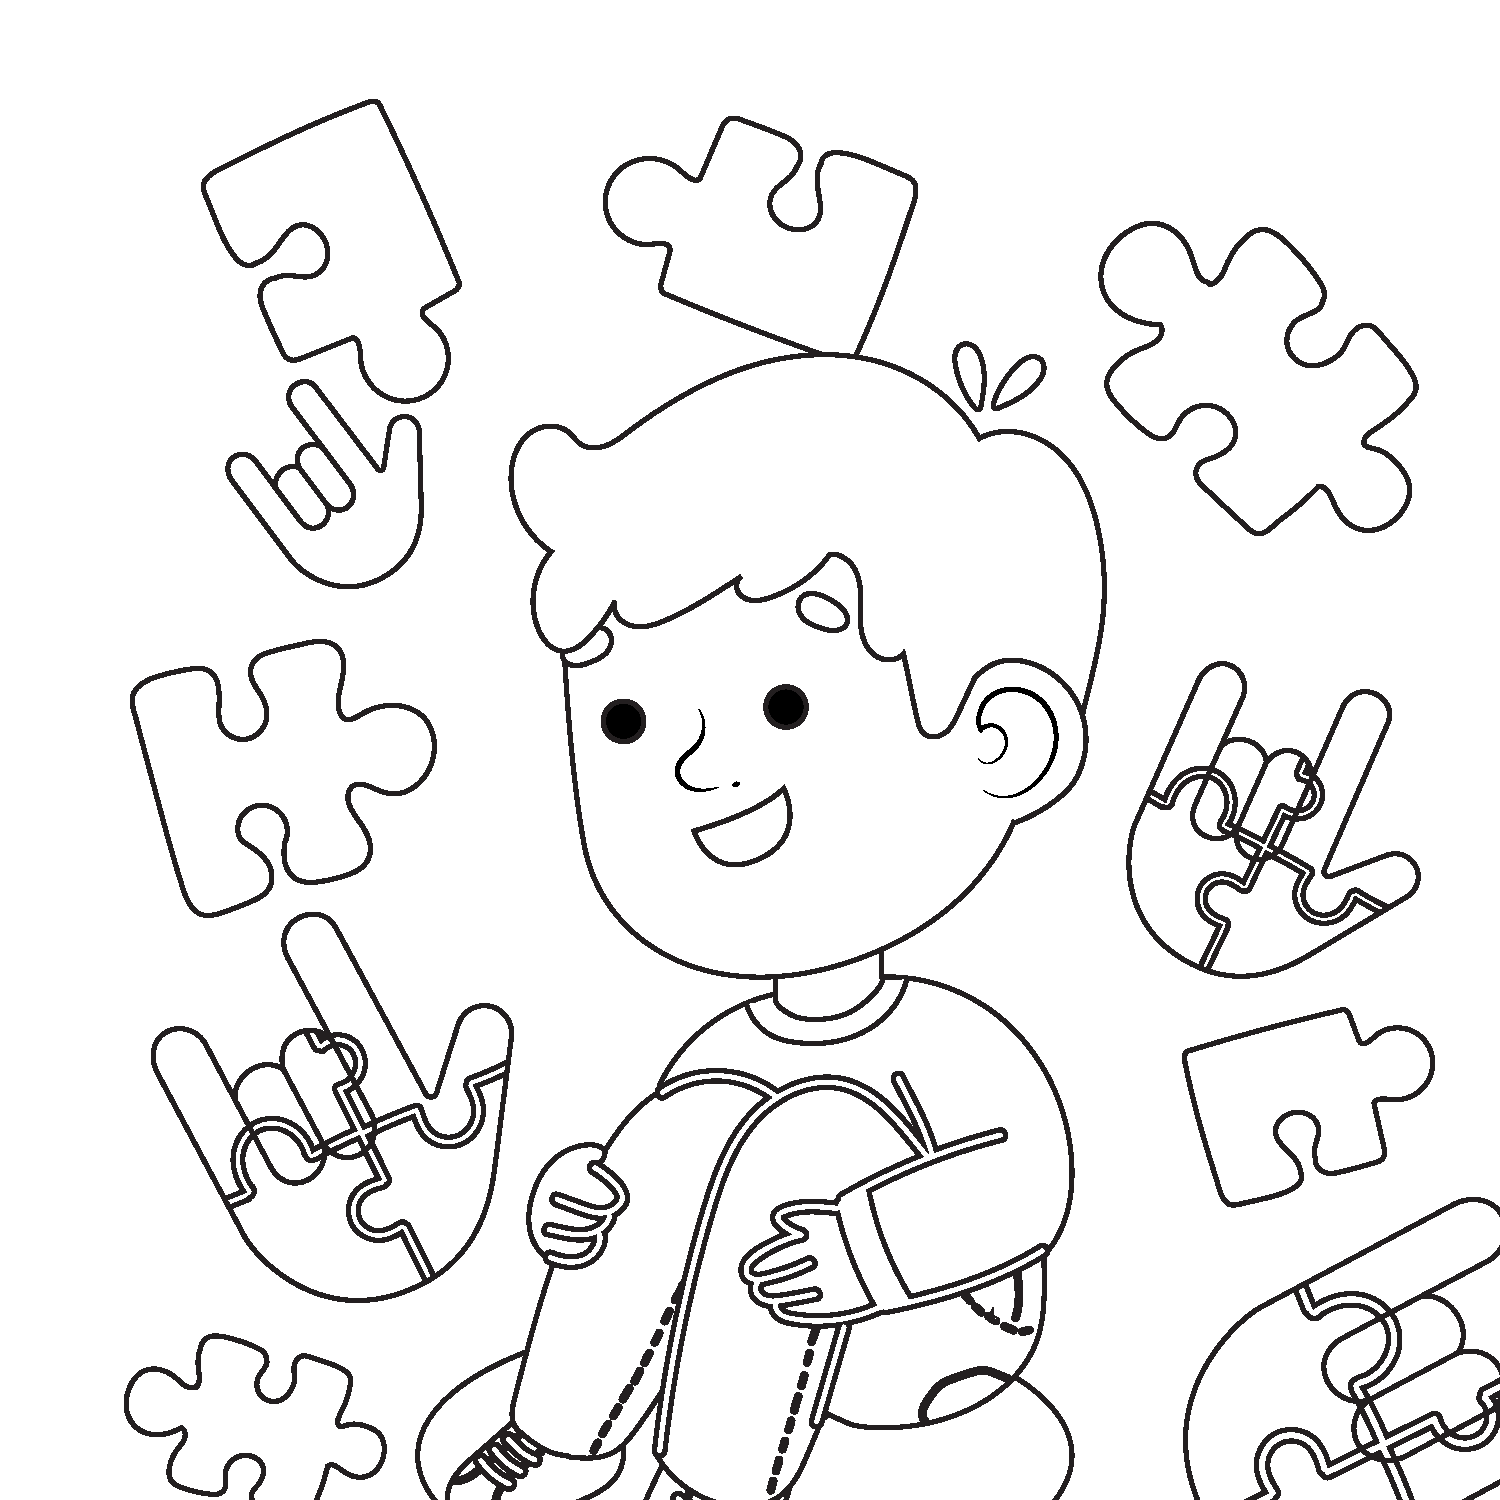 26-best-ideas-for-coloring-autism-awareness-month-coloring-pages